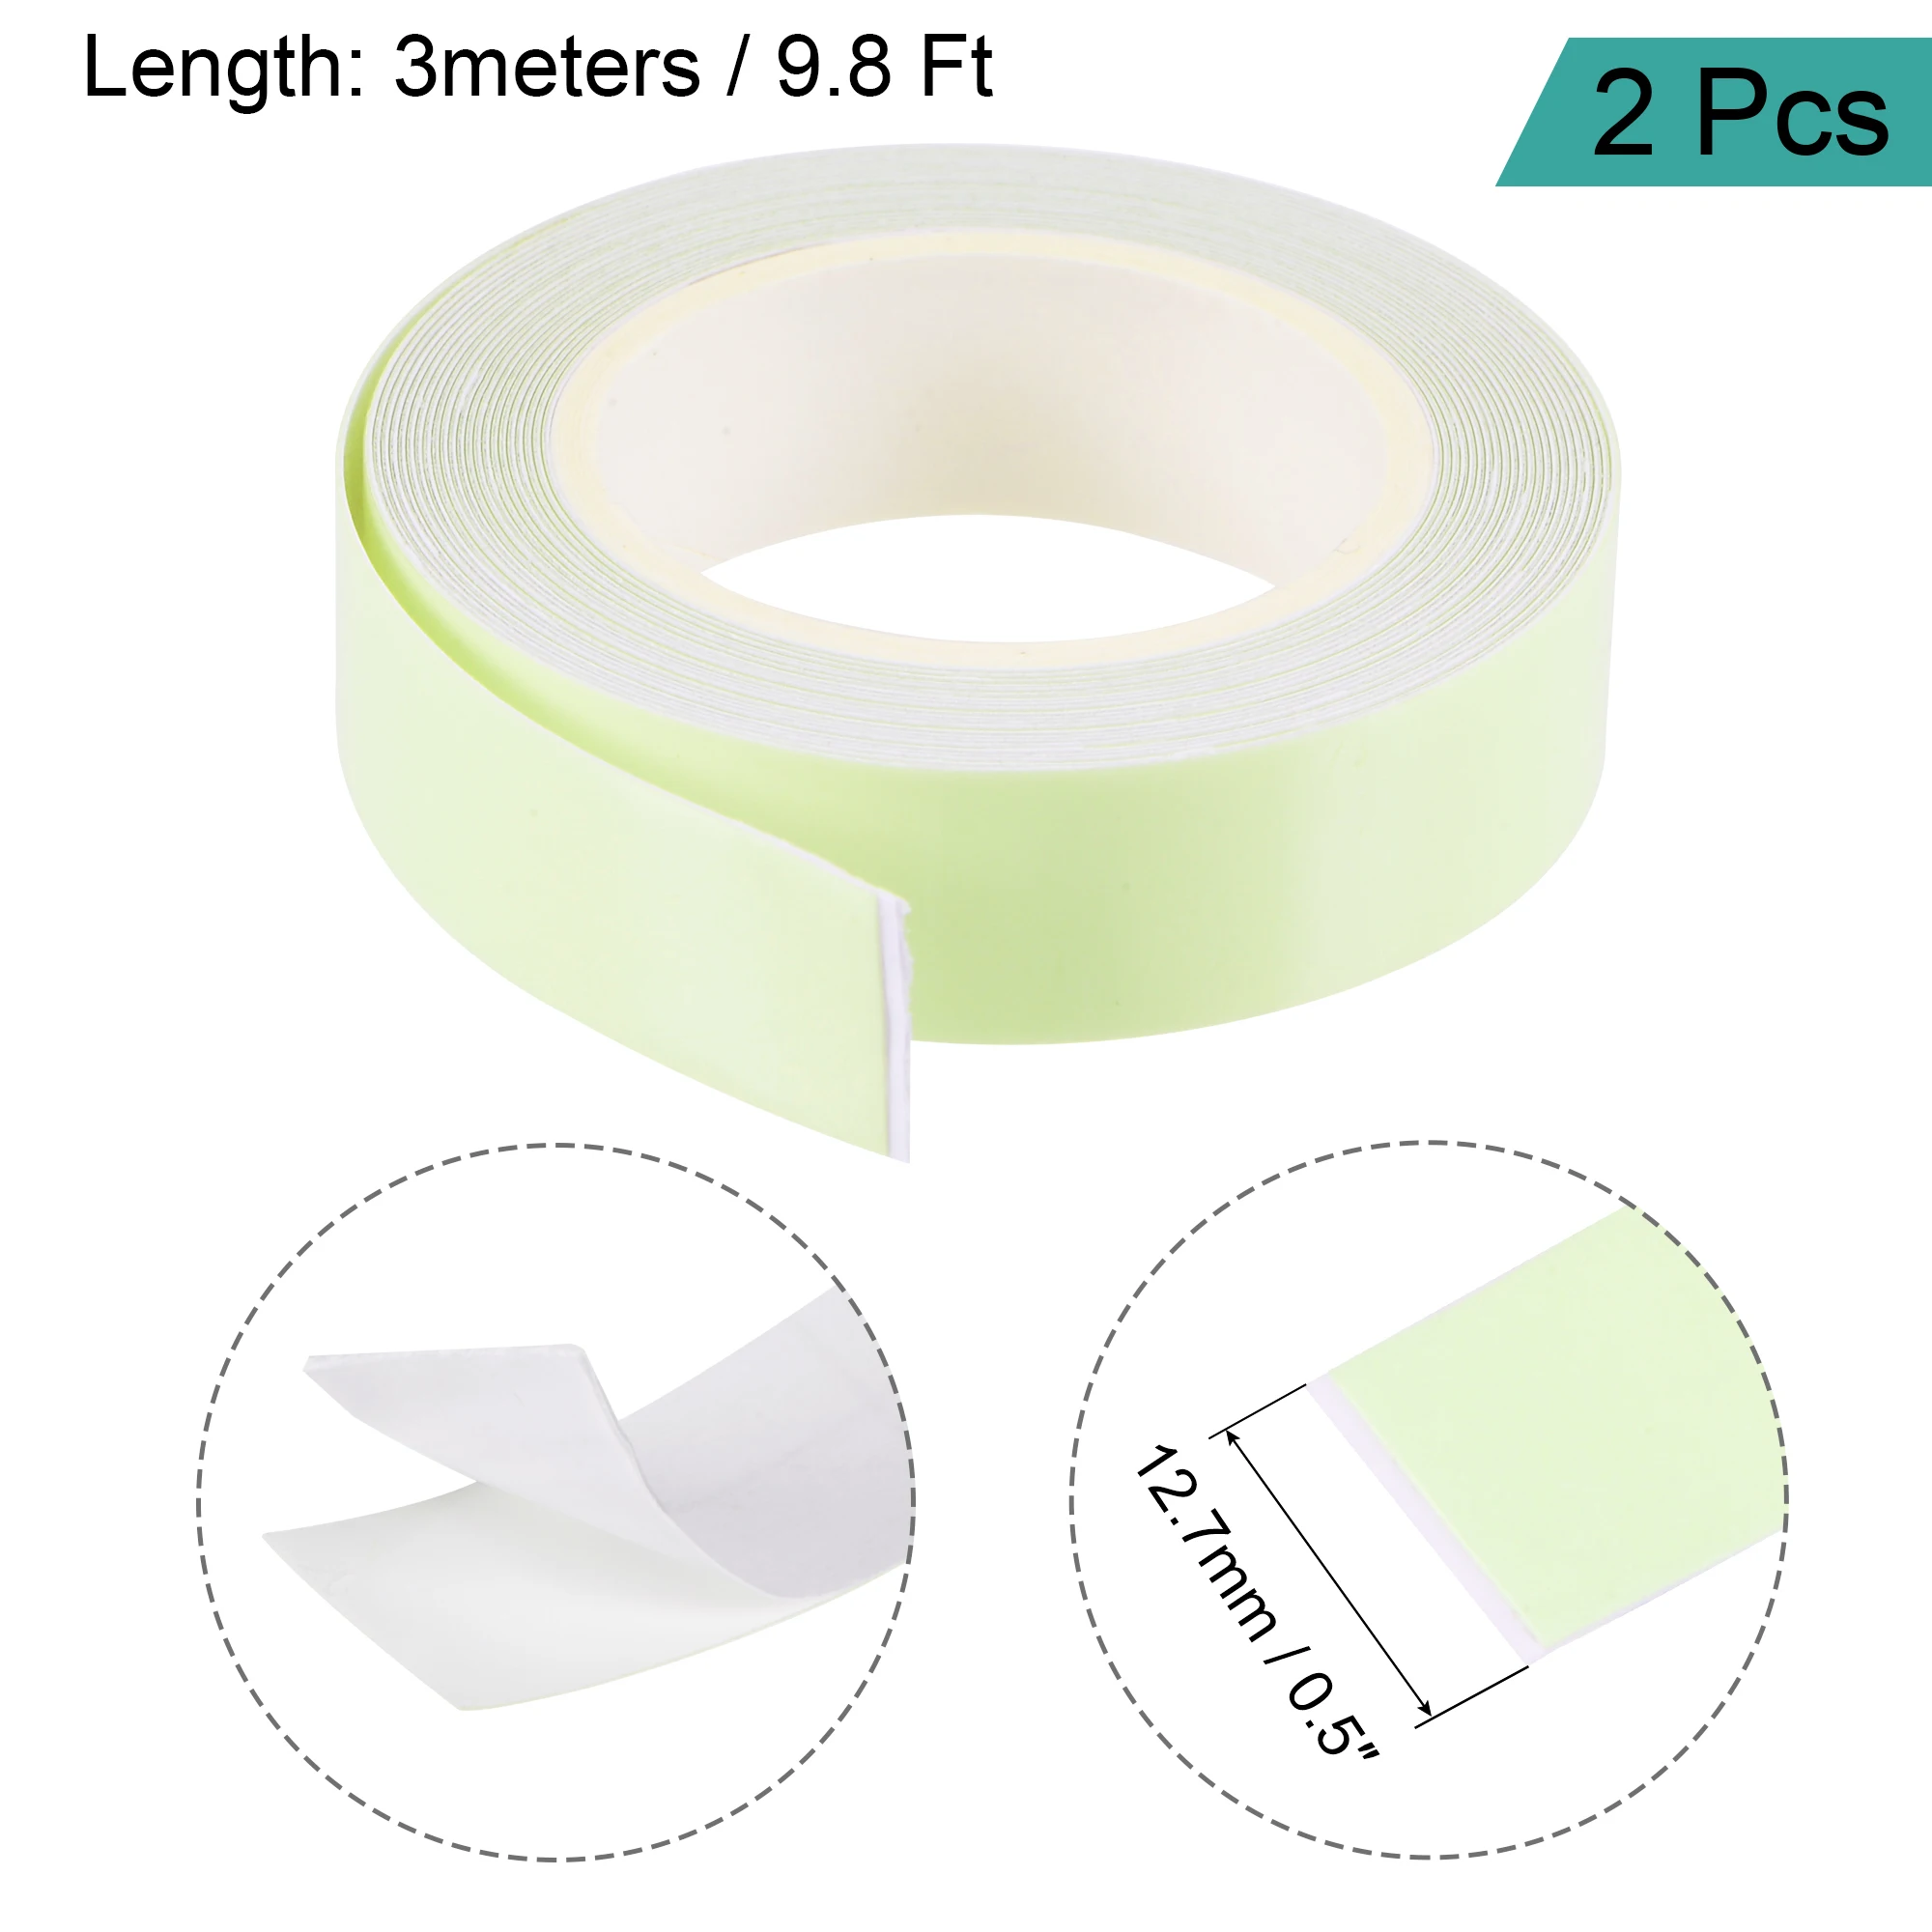 sourcing map Glow in The Dark Tape 0.5 Inch x 9.8 Ft Blue for Night Decorations